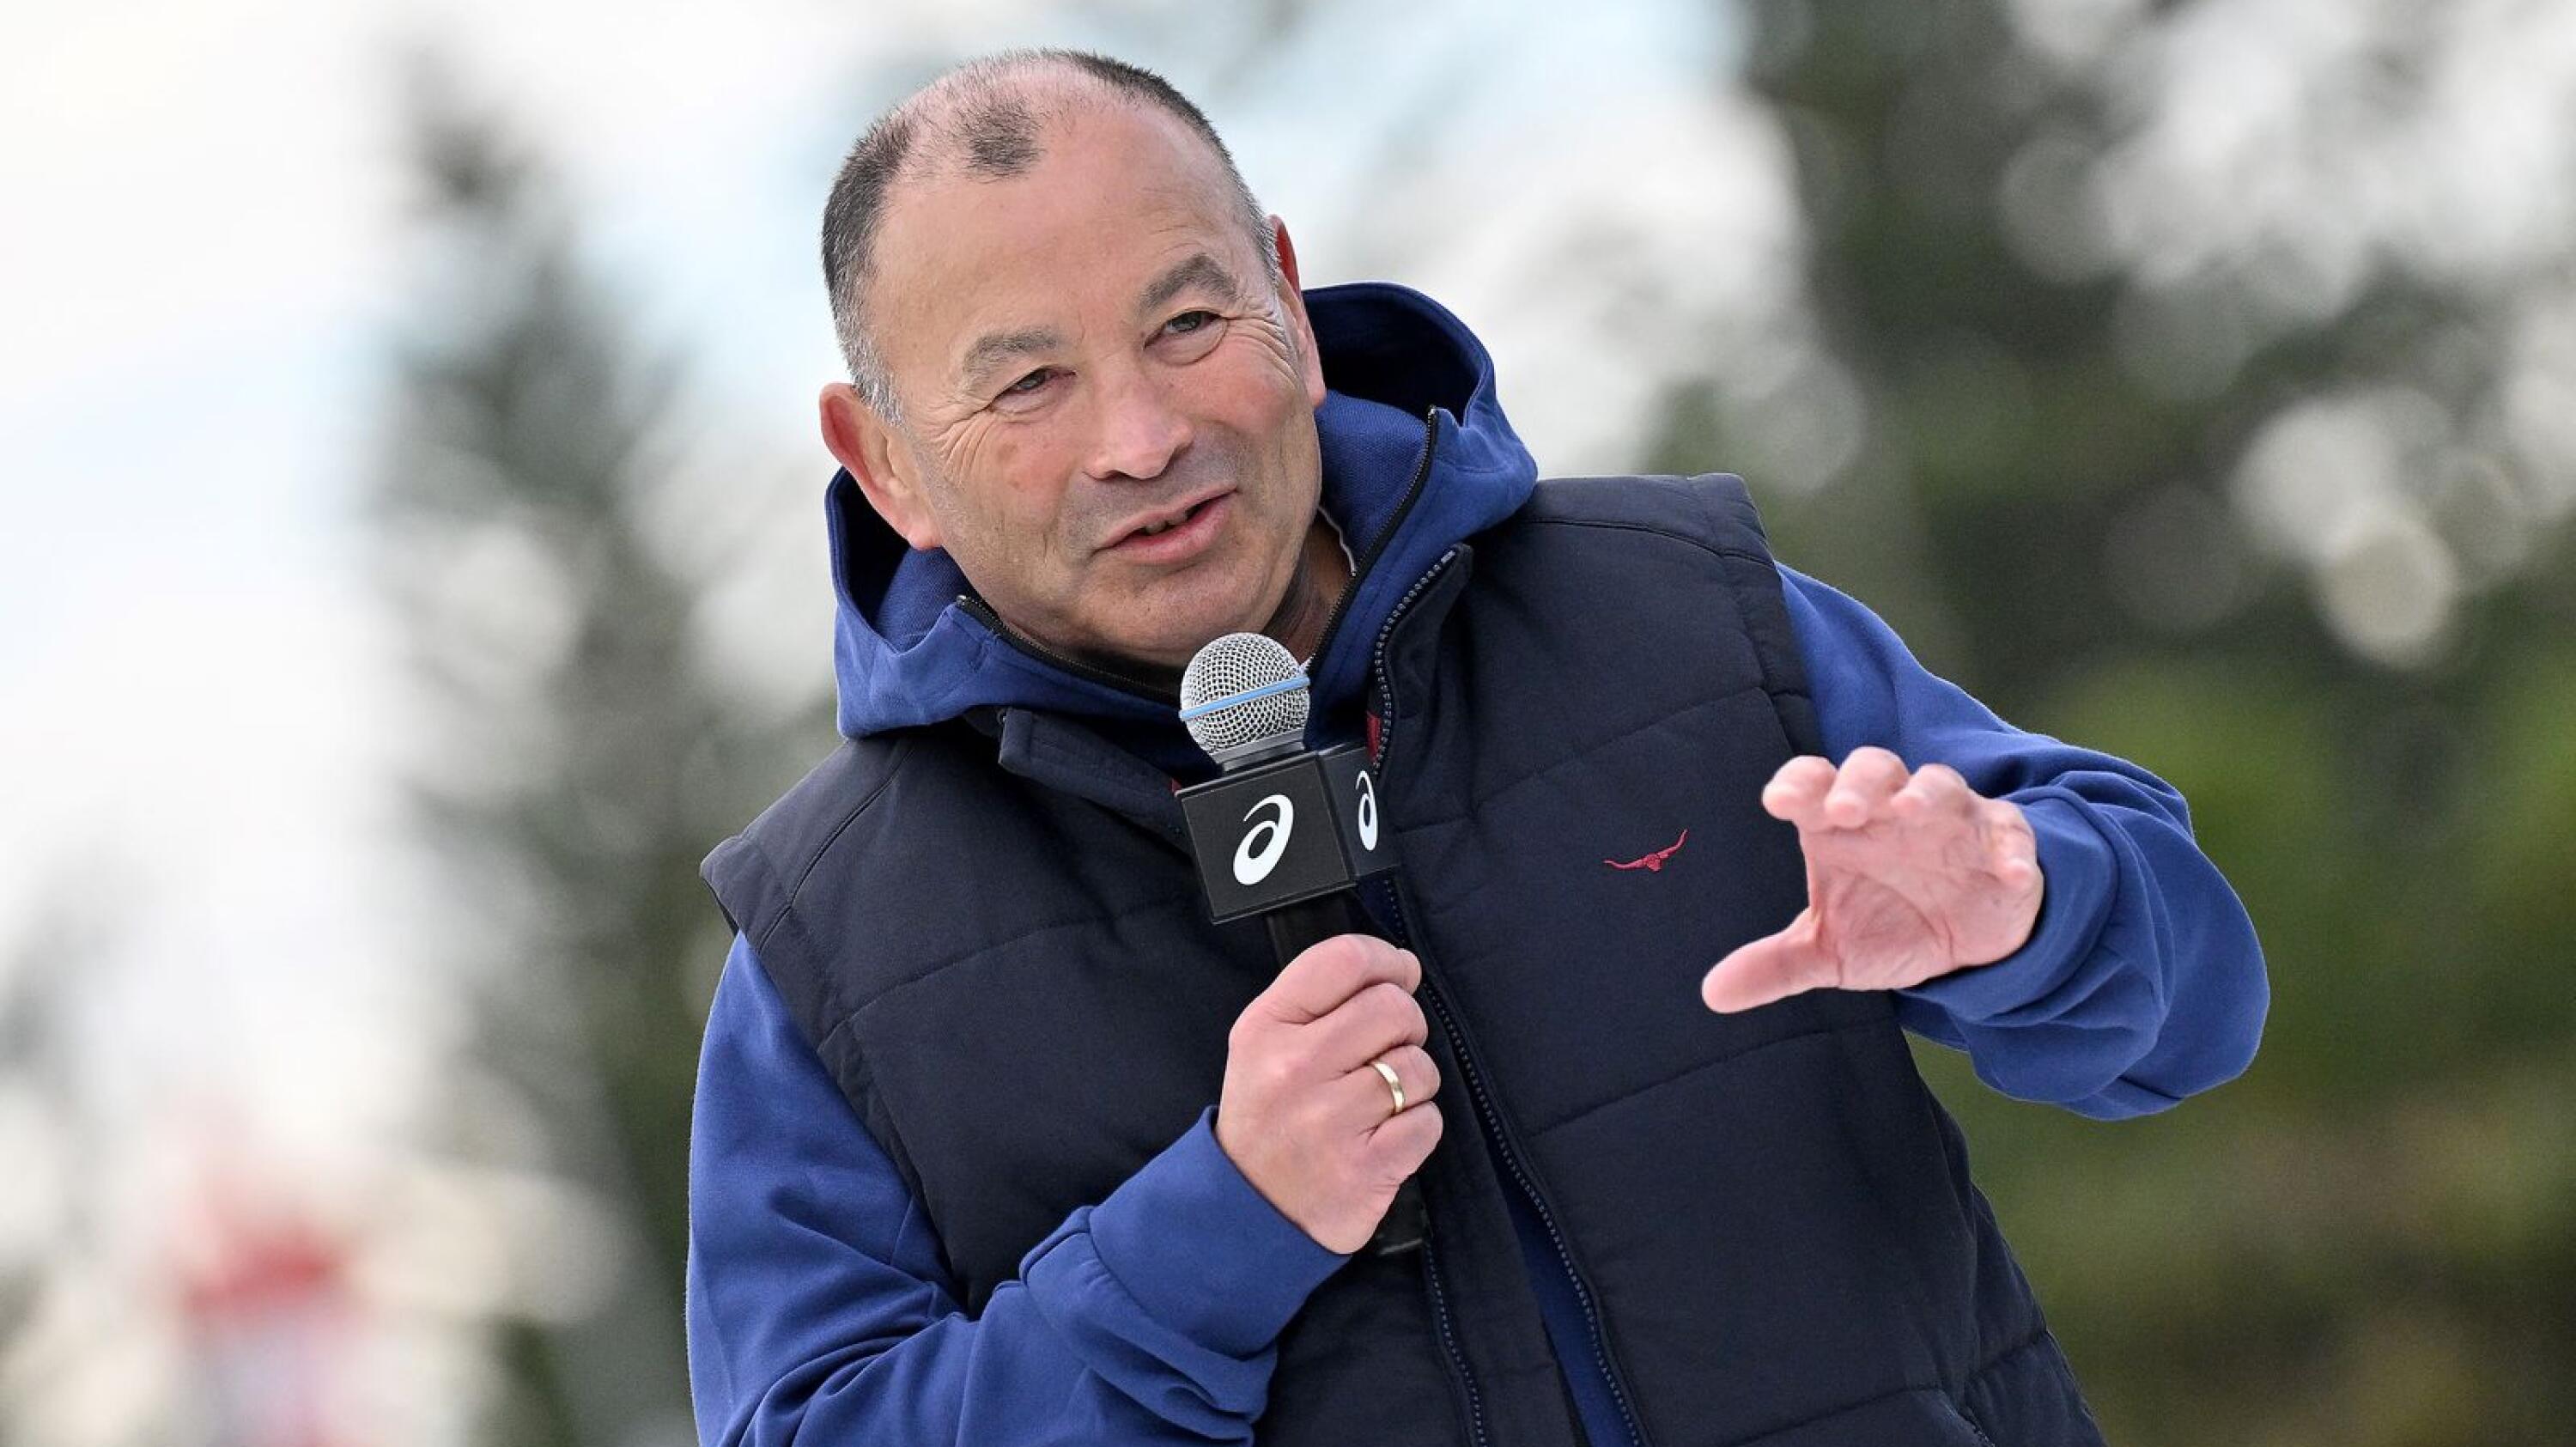 Australia’s head coach Eddie Jones speaks during a Rugby Australia media opportunity launching the Wallabies 2023 Rugby World Cup jersey in Sydney